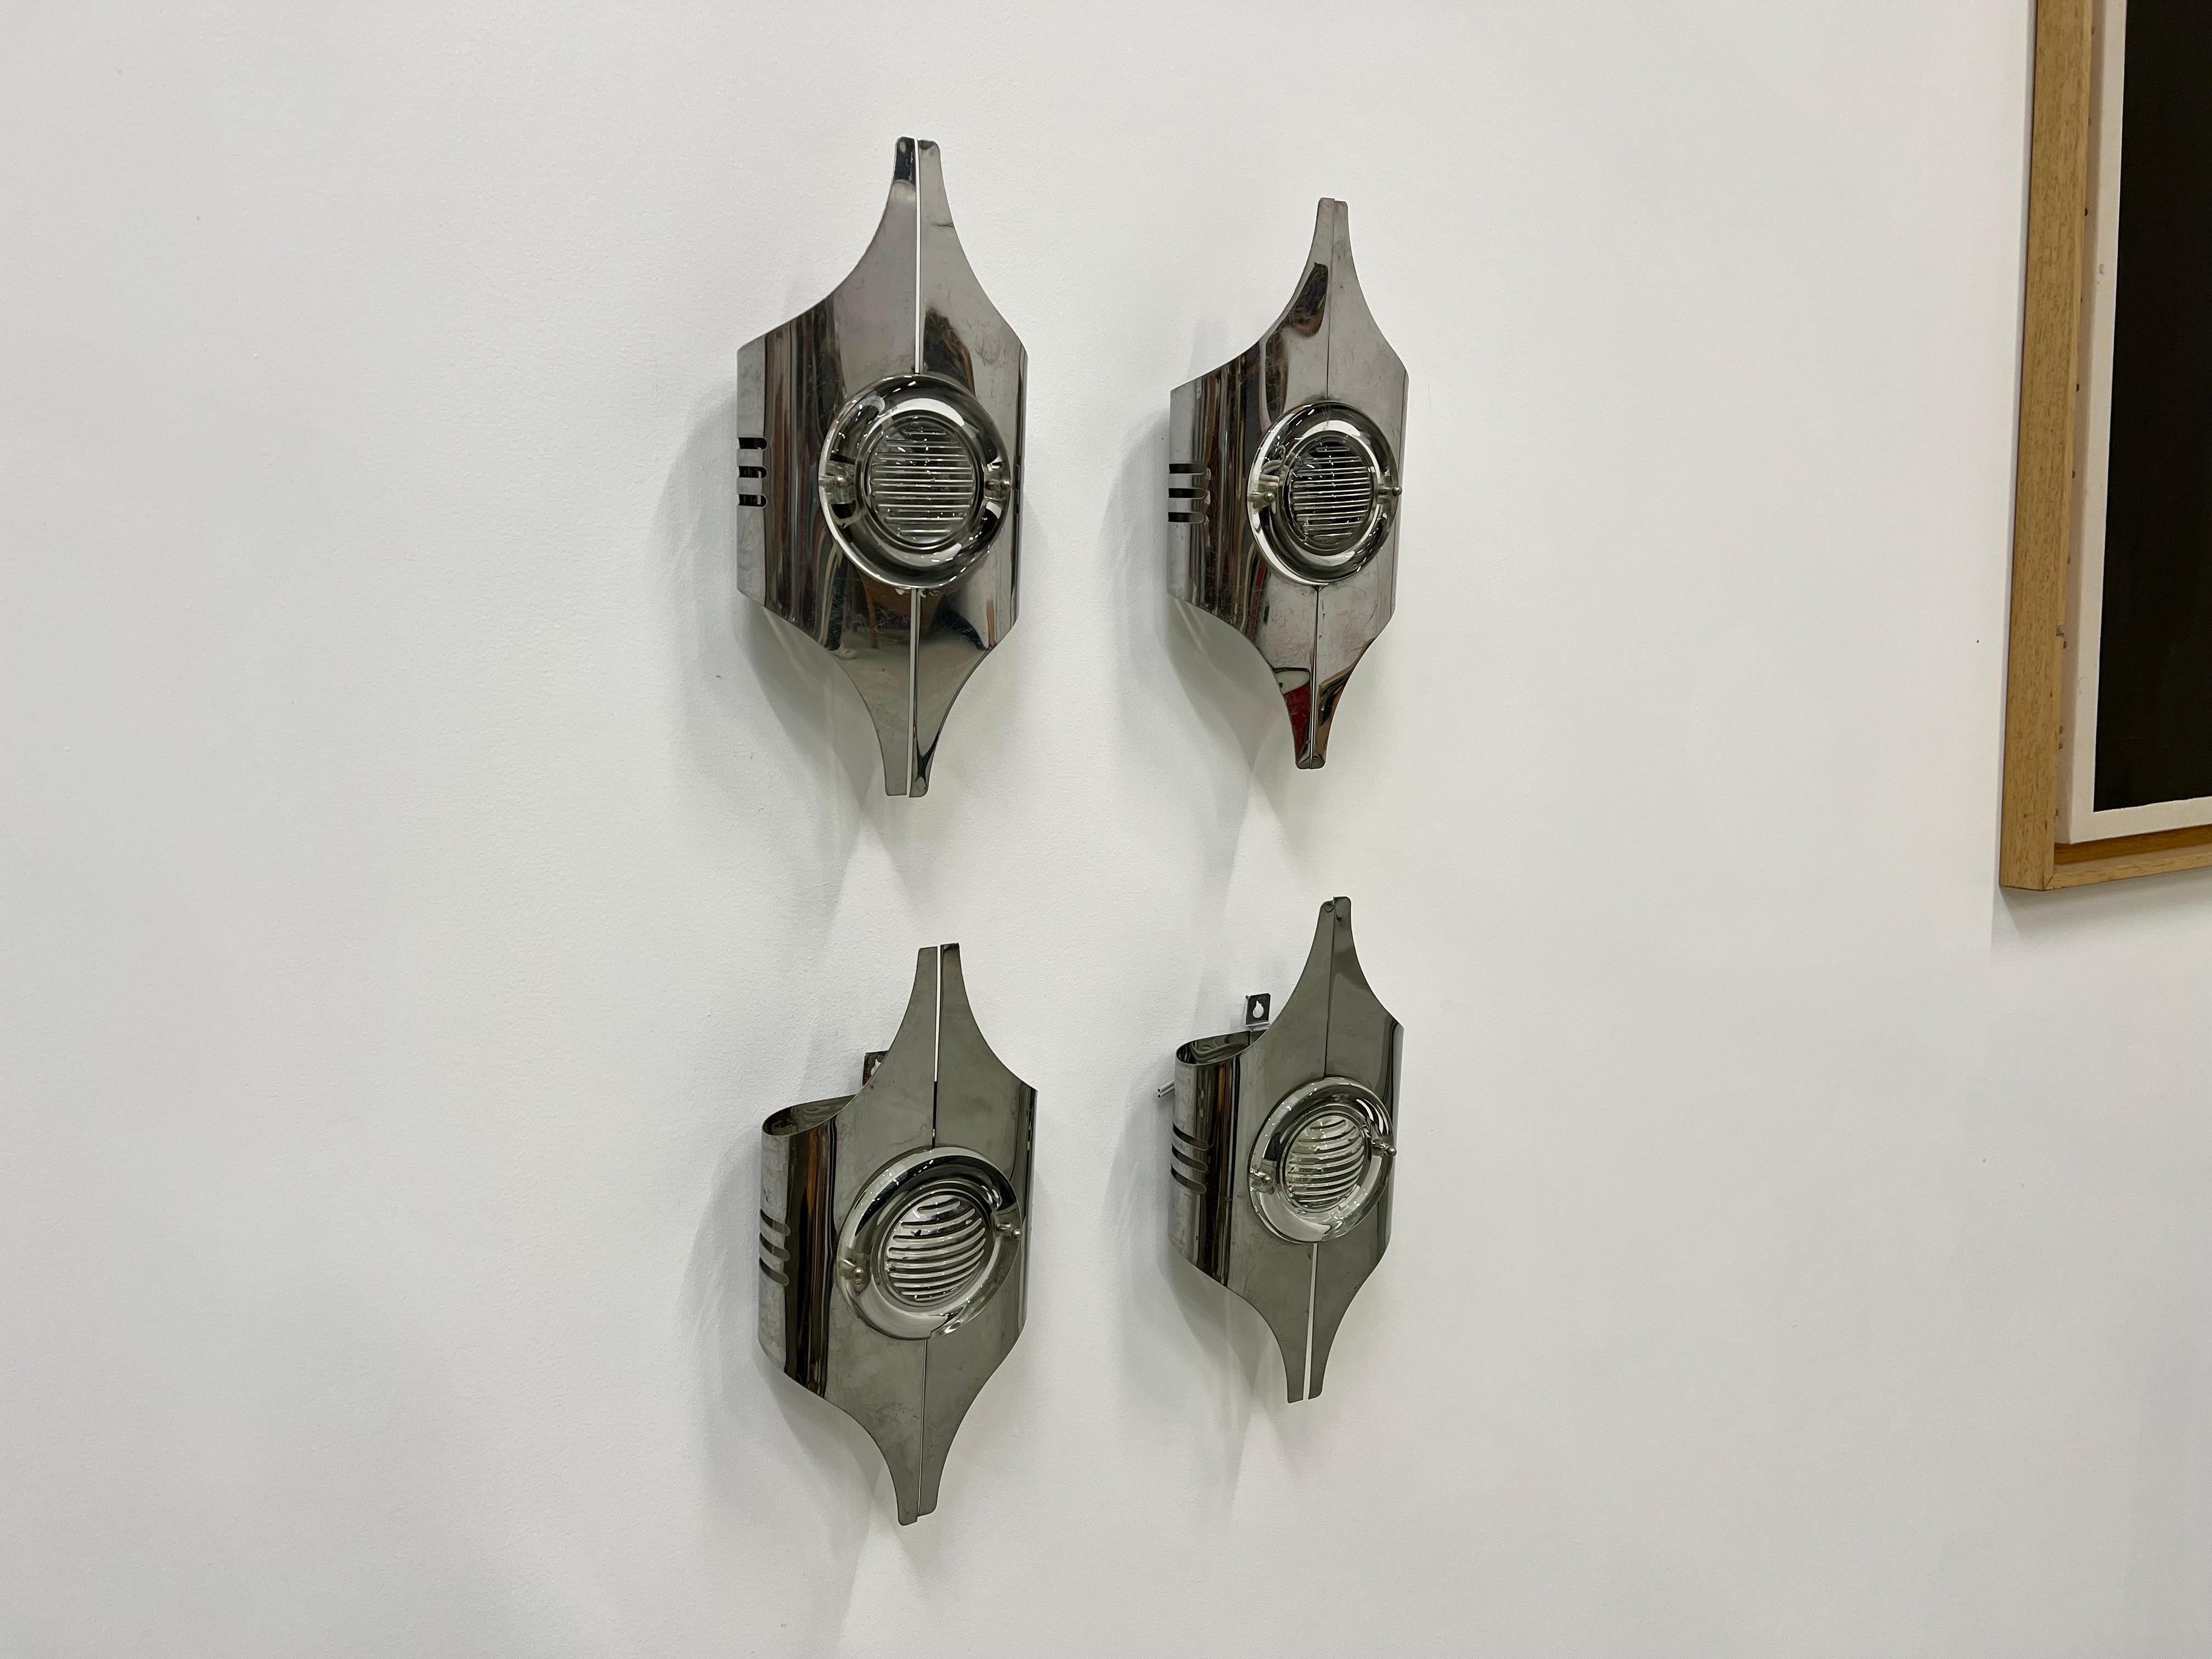 Pretty series of 4 glass and stainless steel wall lights from the 70s, Italian production attributed to Oscar Torlasco. Works on both 110 and 220 volts.
